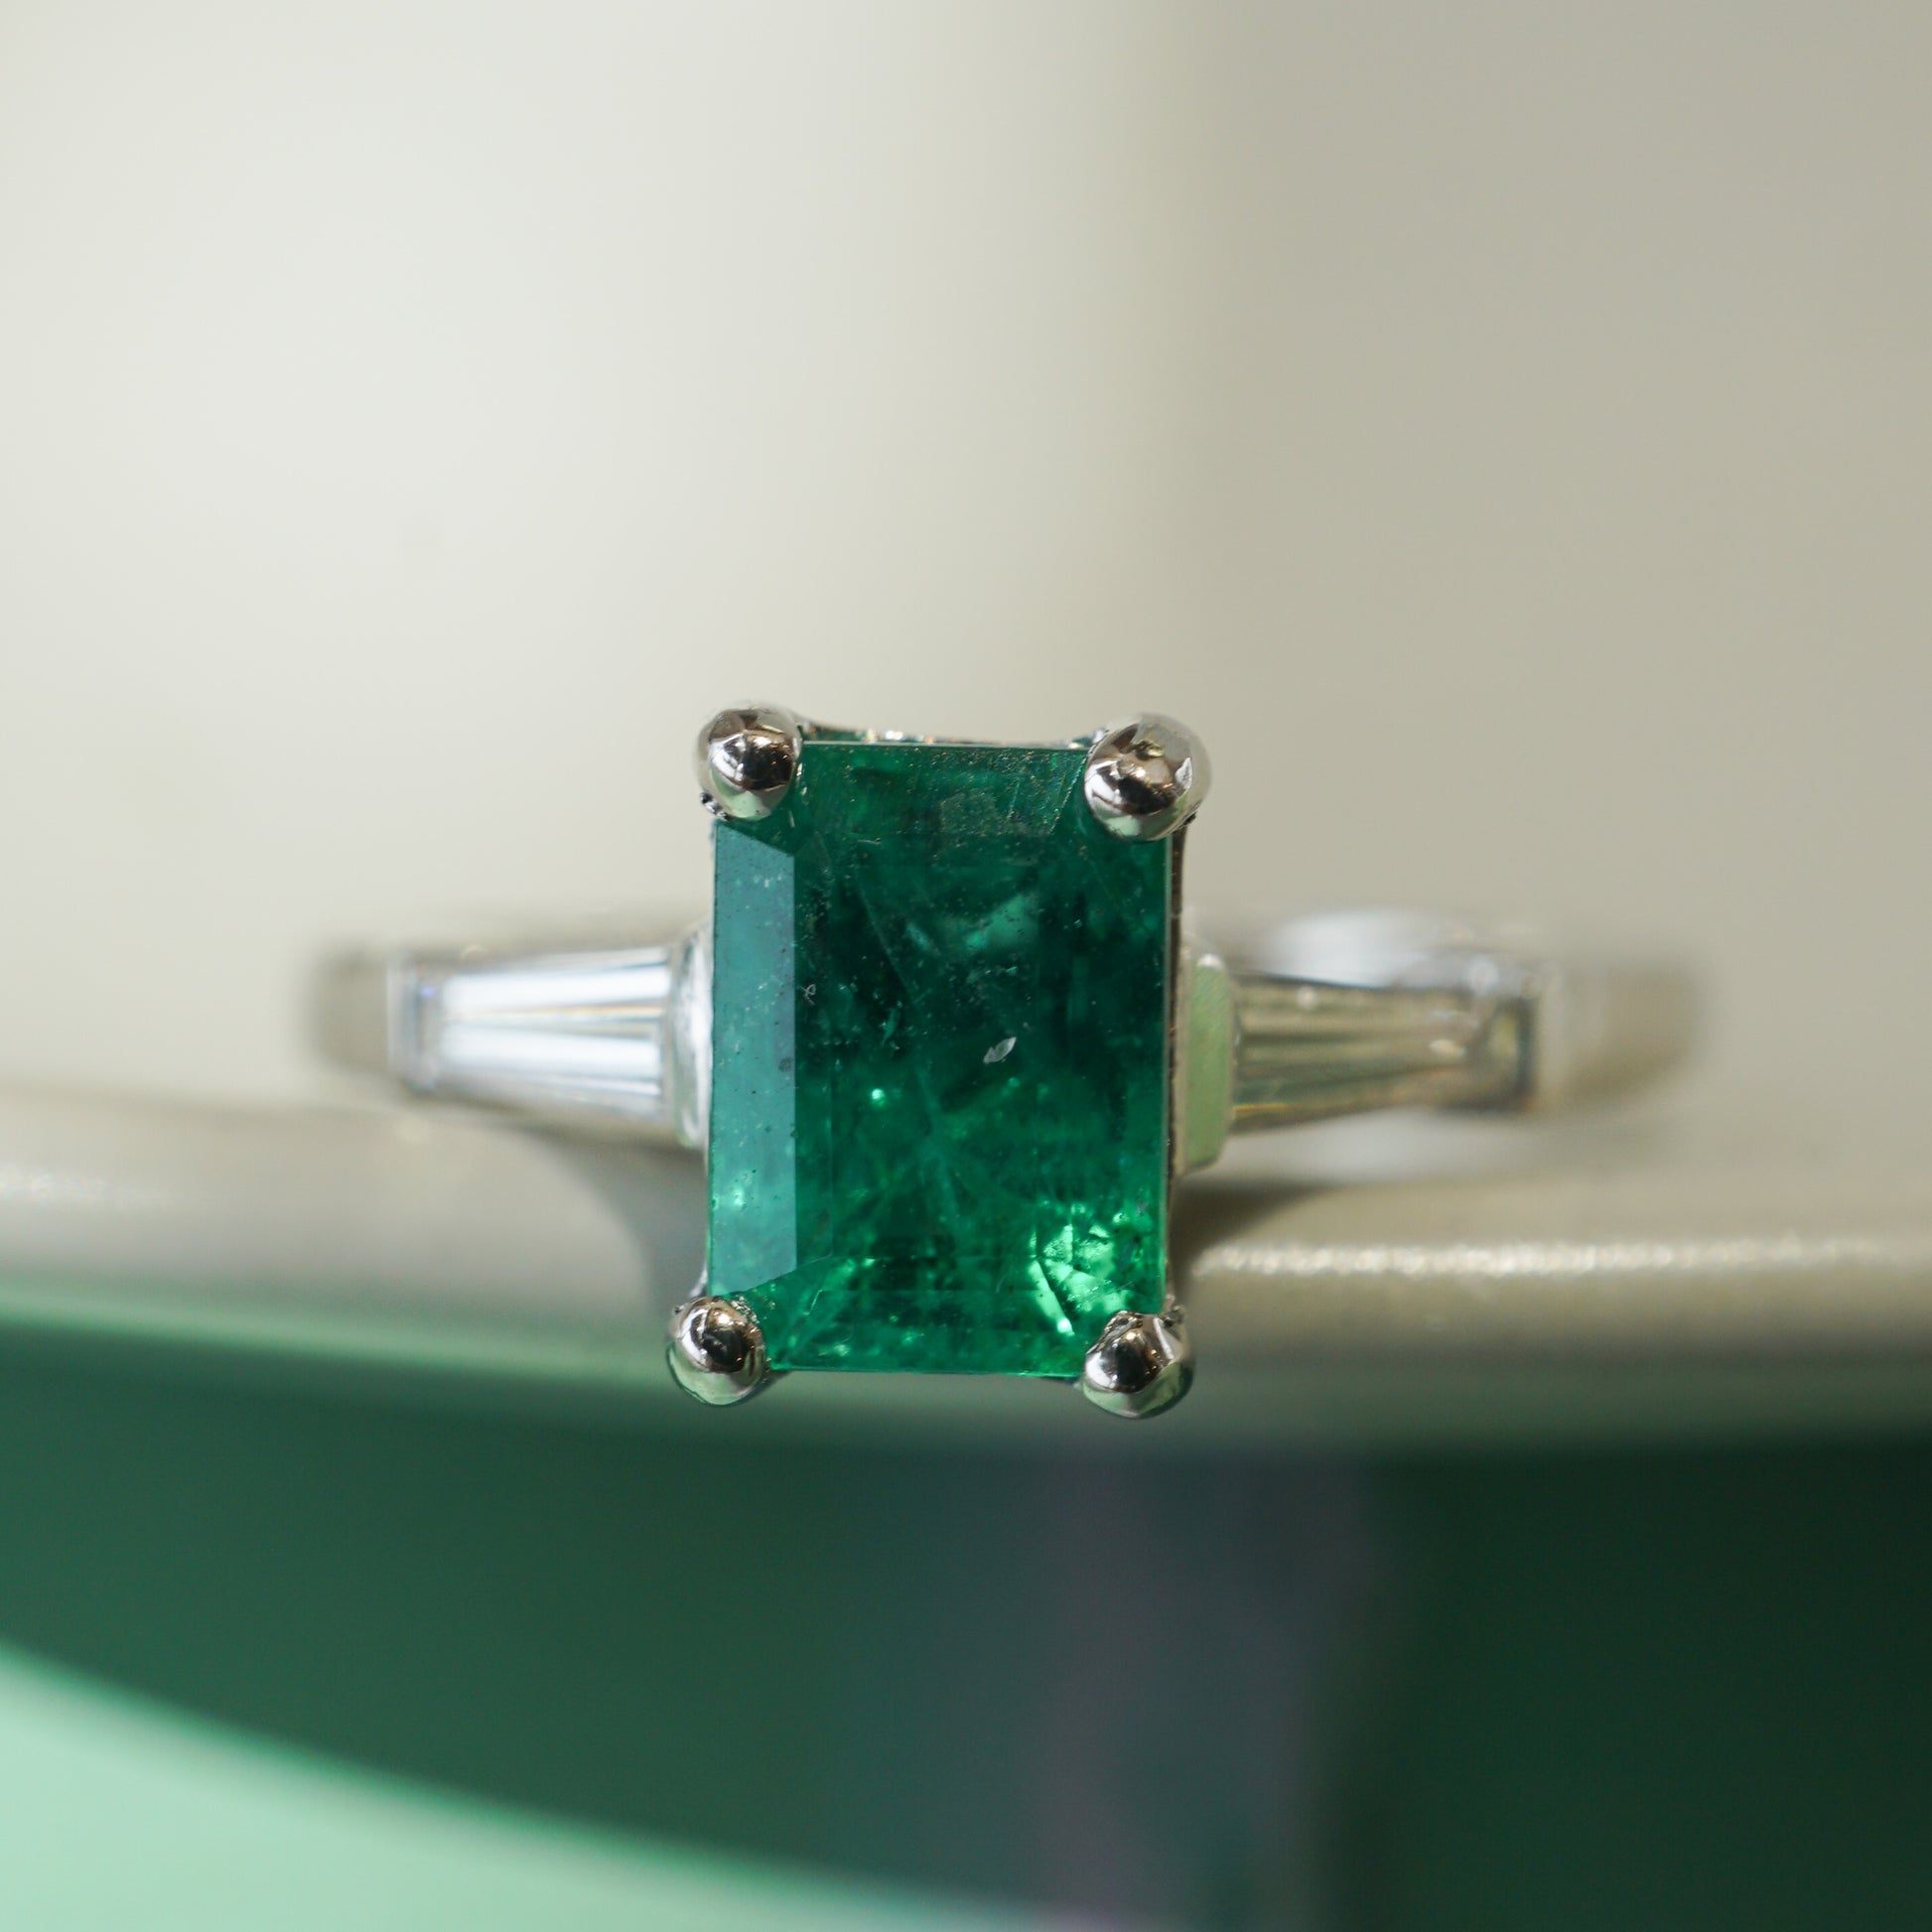 Mid-Century 1.12 Emerald & Diamond Ring in PlatinumComposition: PlatinumRing Size: 5.75Total Diamond Weight: .28 ctTotal Gram Weight: 5.2 gInscription: 950 PLAT